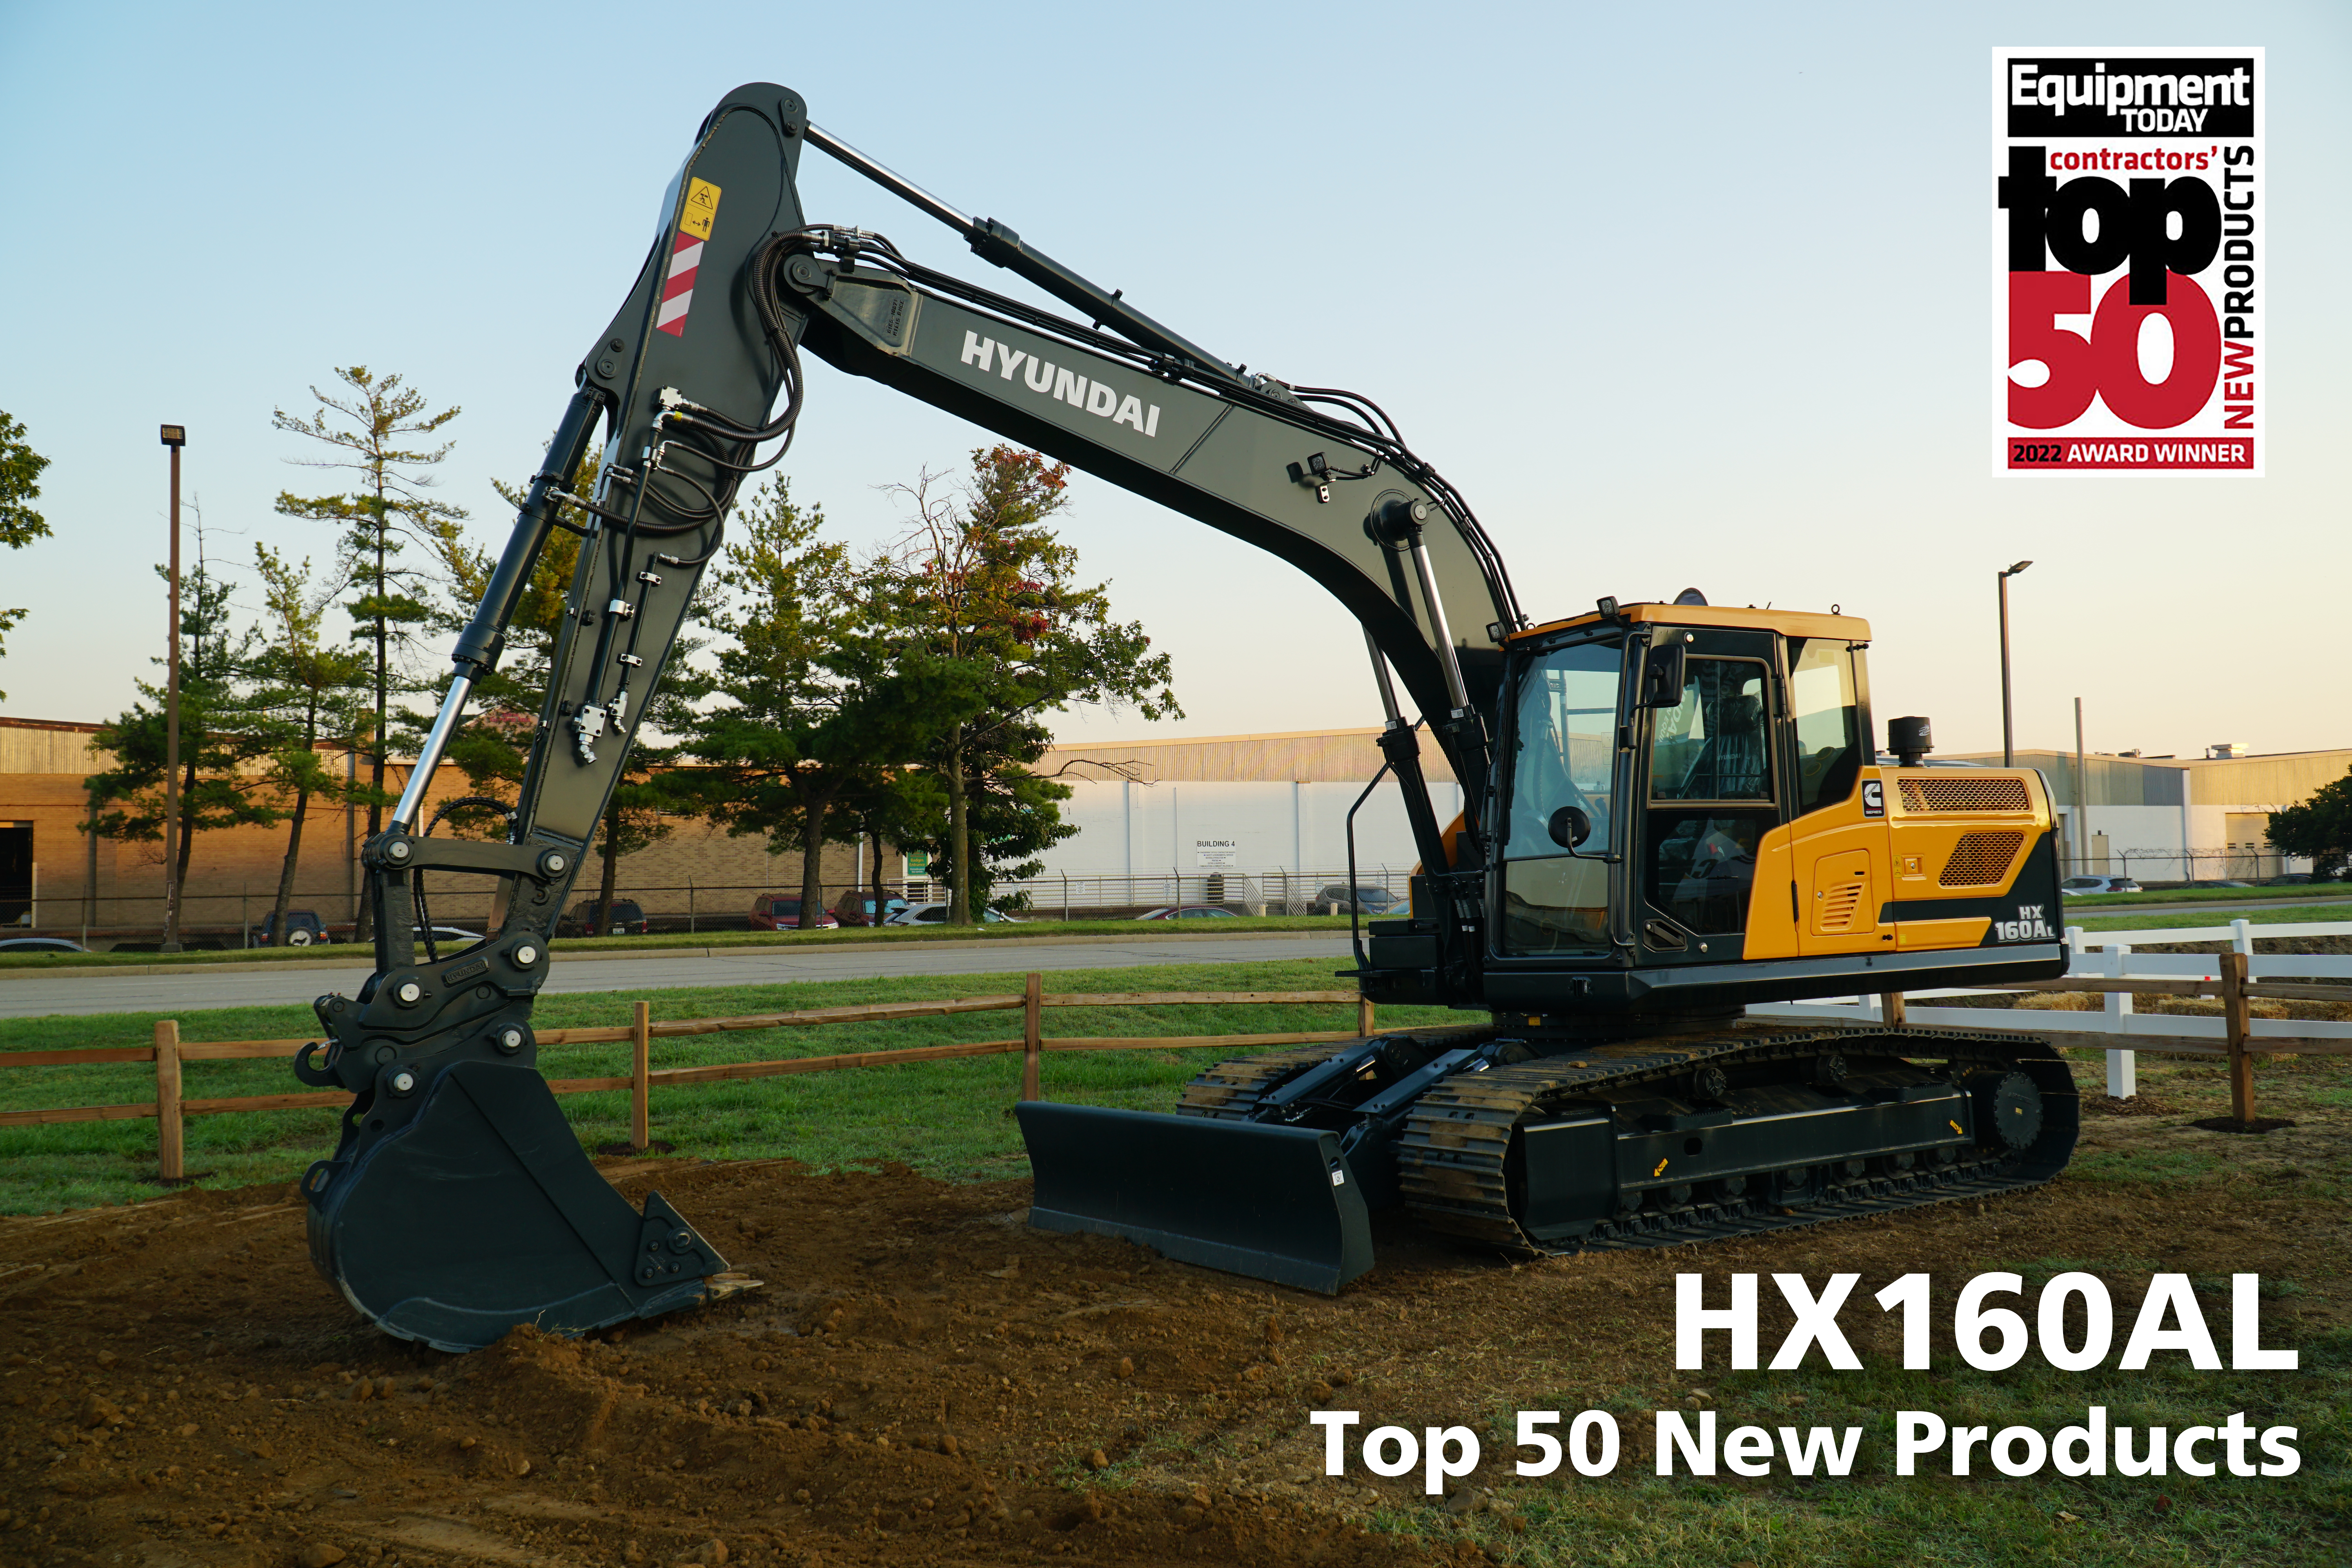 Hyundai Excavator Wins Top New Product of 2022 Award From Equipment Today